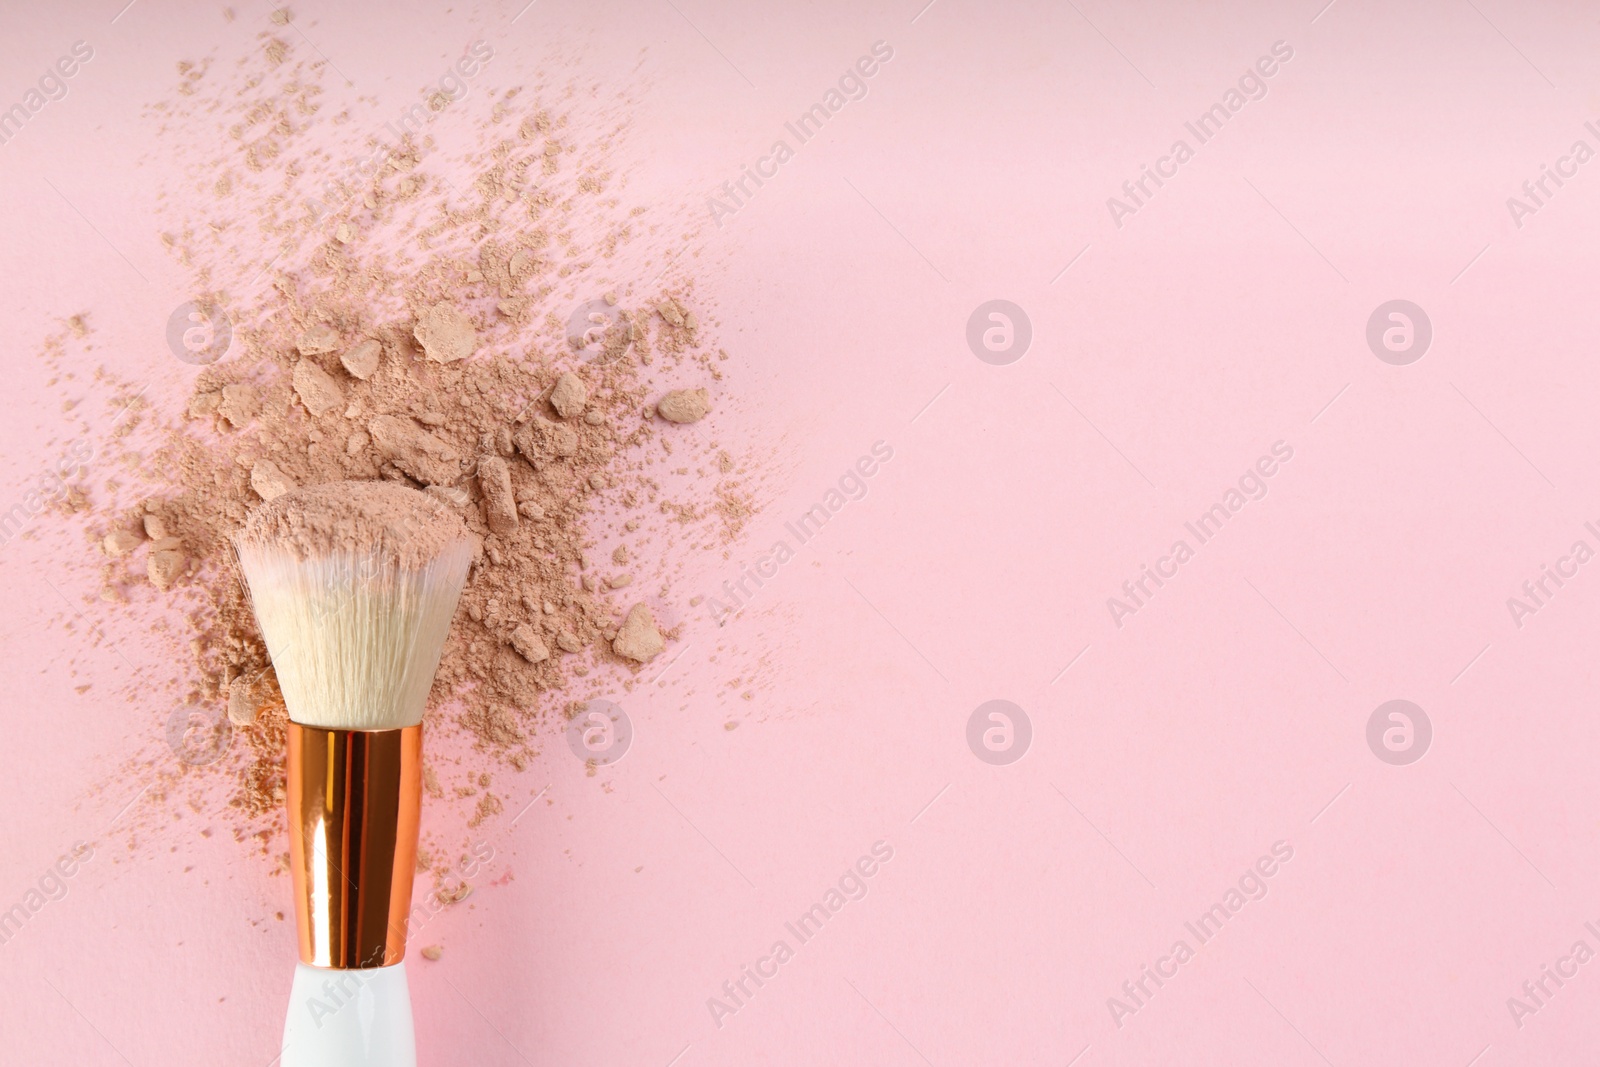 Photo of Makeup brush and scattered face powder on pink background, top view. Space for text